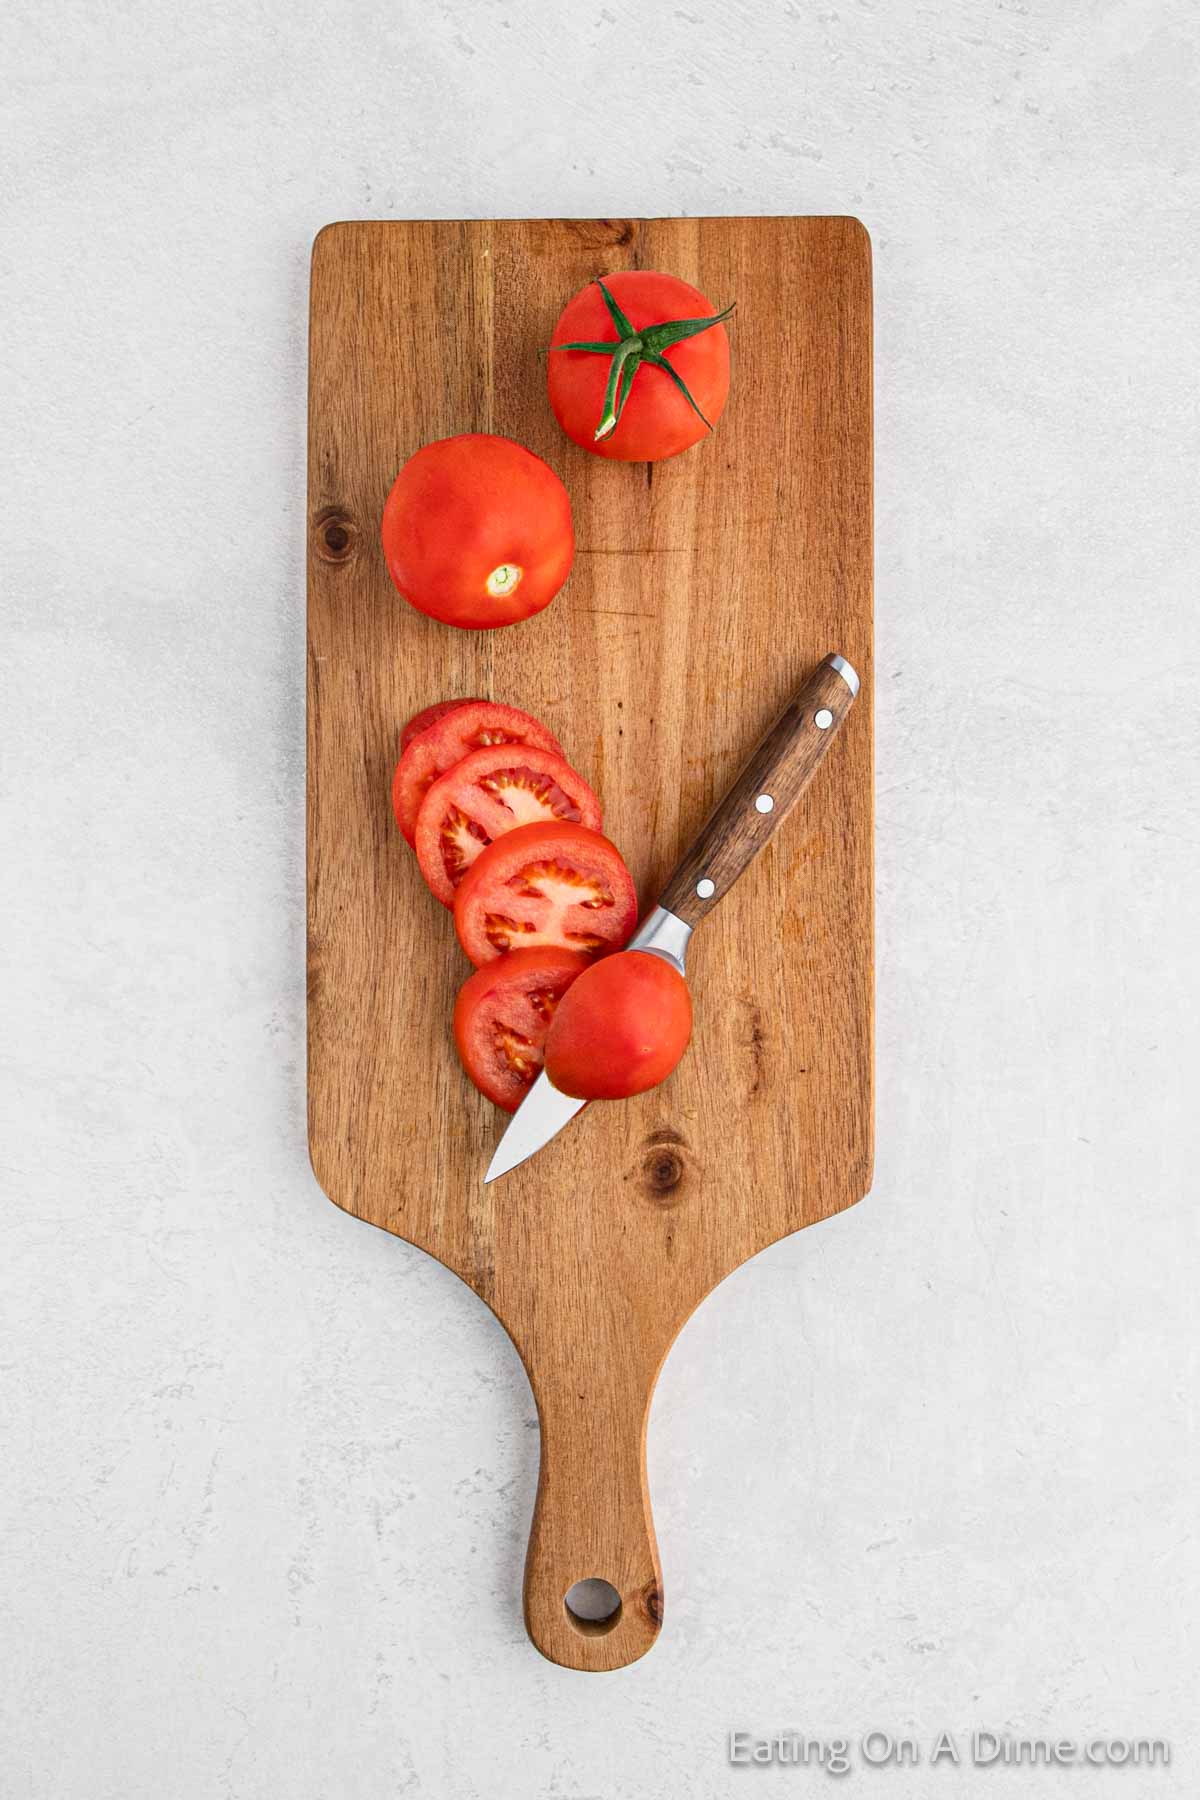 Slicing tomatoes on a cutting board